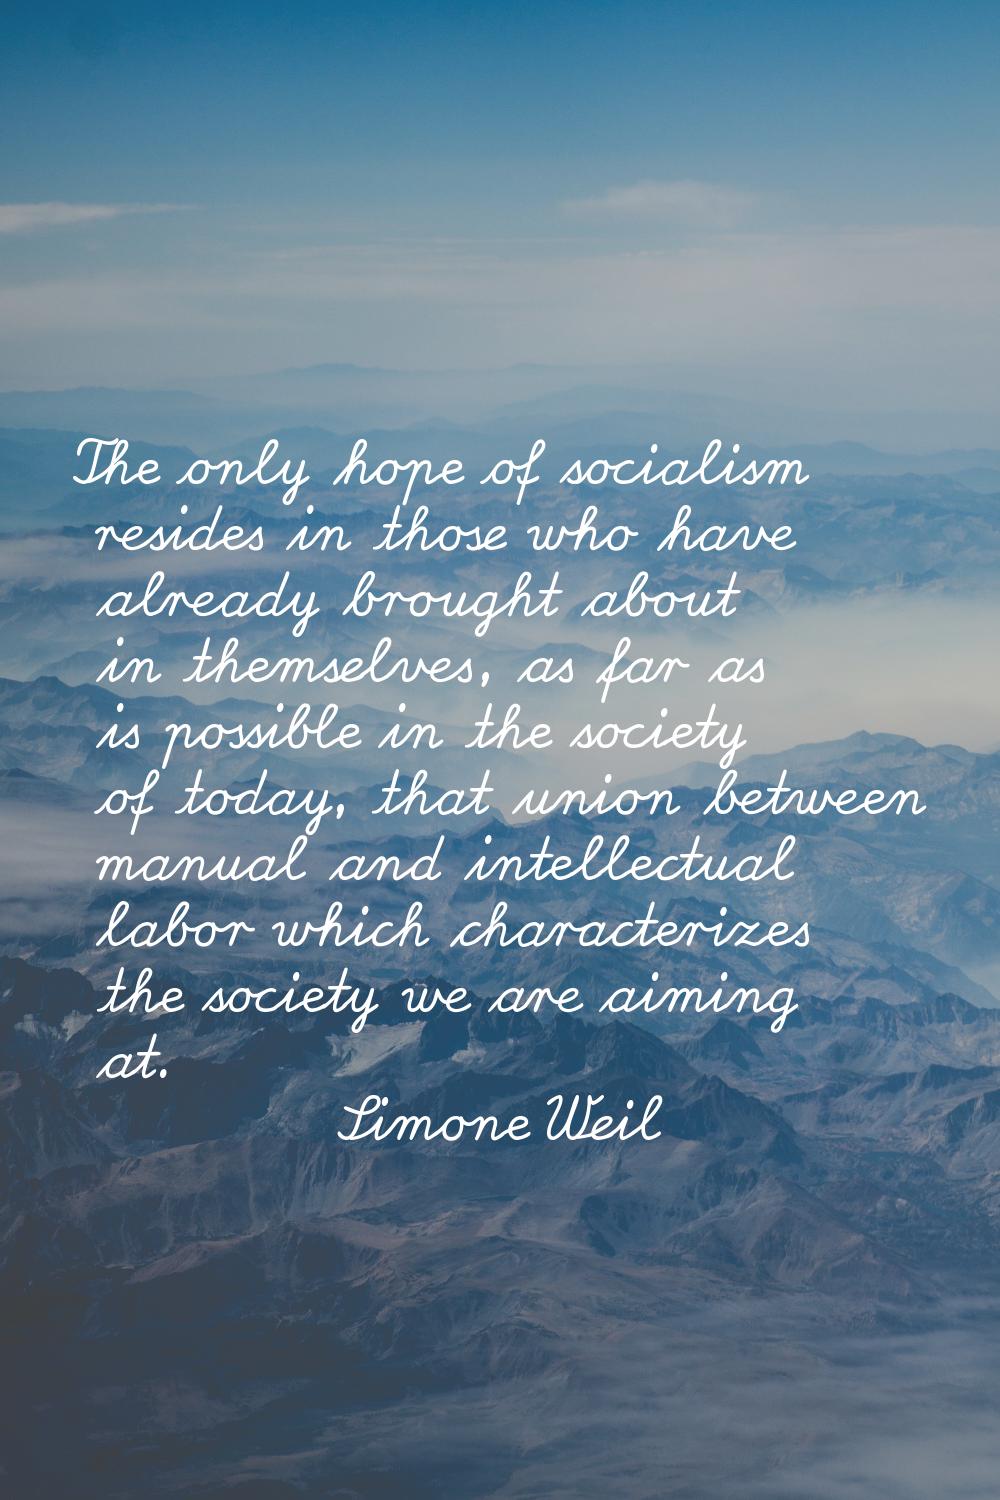 The only hope of socialism resides in those who have already brought about in themselves, as far as